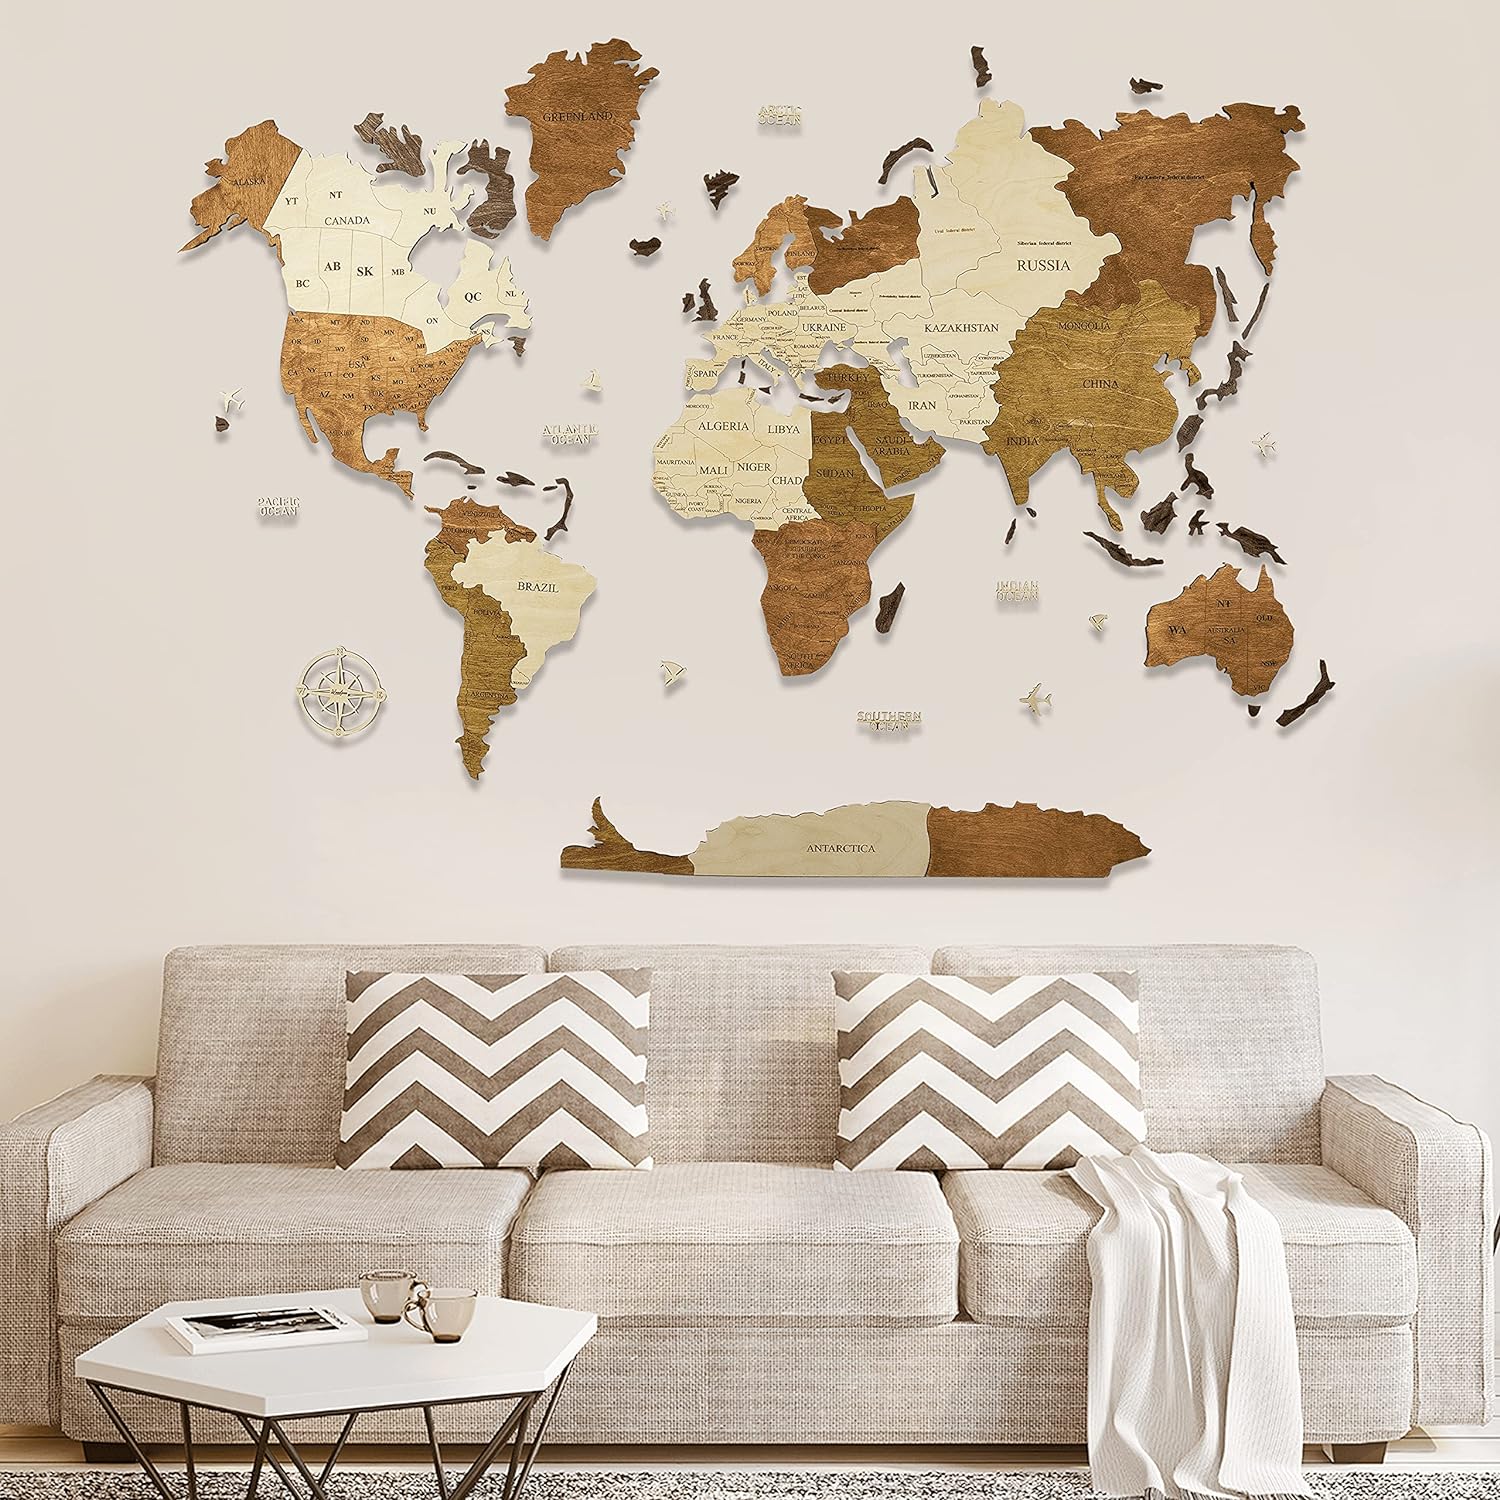 World Map Push Pin 3D Wood World Map Wooden Wall Decor Wood Map Anniversary Gift For Boyfriend Rustic Wall Decor Wall Art For Home & Kitchen Wall Art For Office M, Blank map